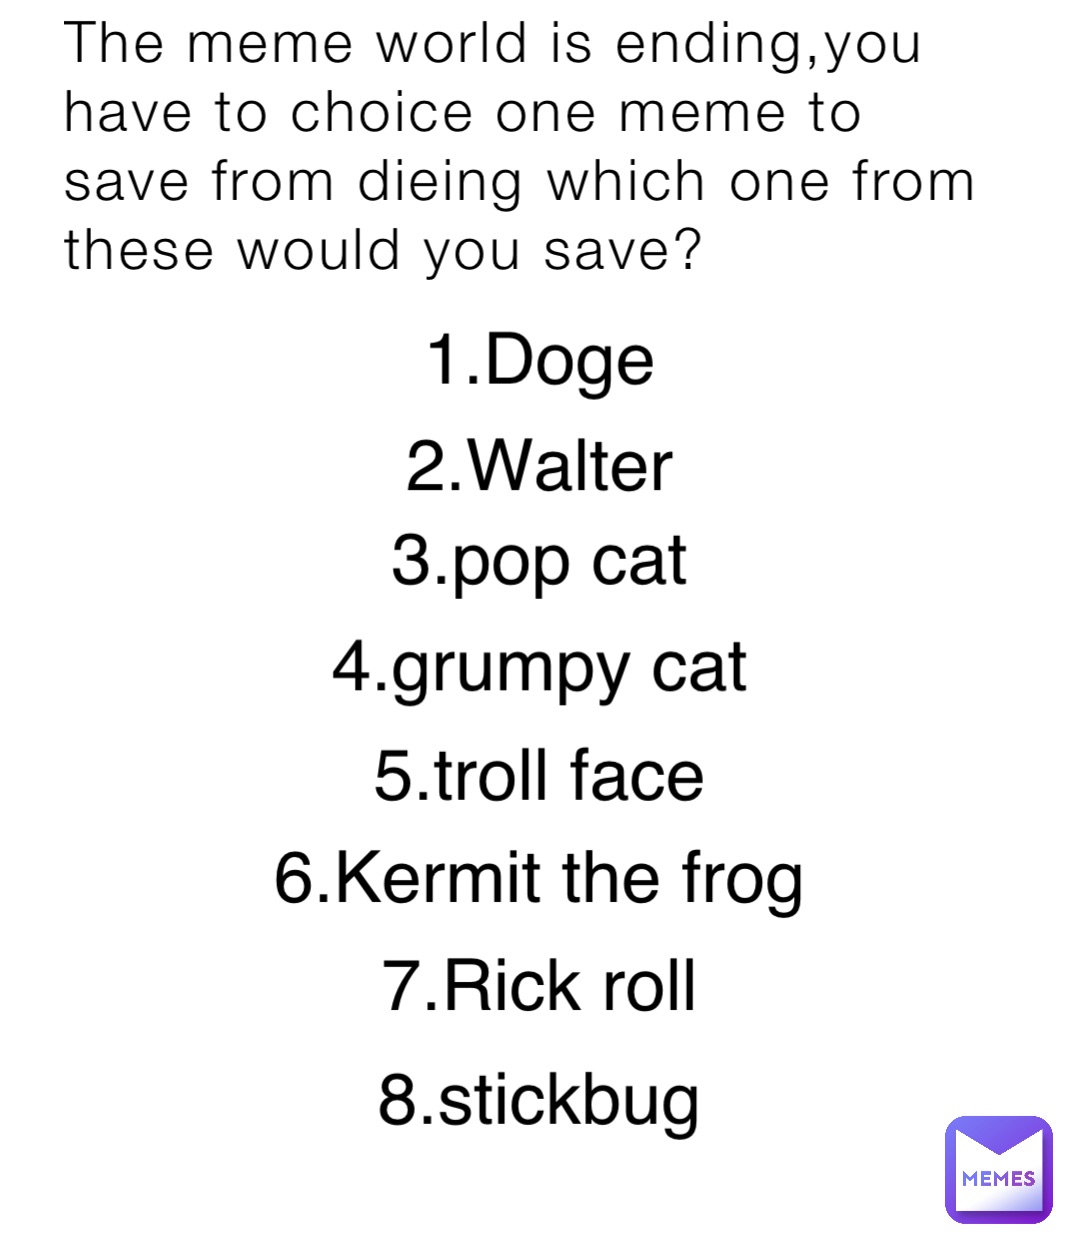 The meme world is ending,you have to choice one meme to save from dieing which one from these would you save? 1.Doge 2.Walter 3.pop cat 4.grumpy cat 5.troll face 6.Kermit the frog 7.Rick roll 8.stickbug